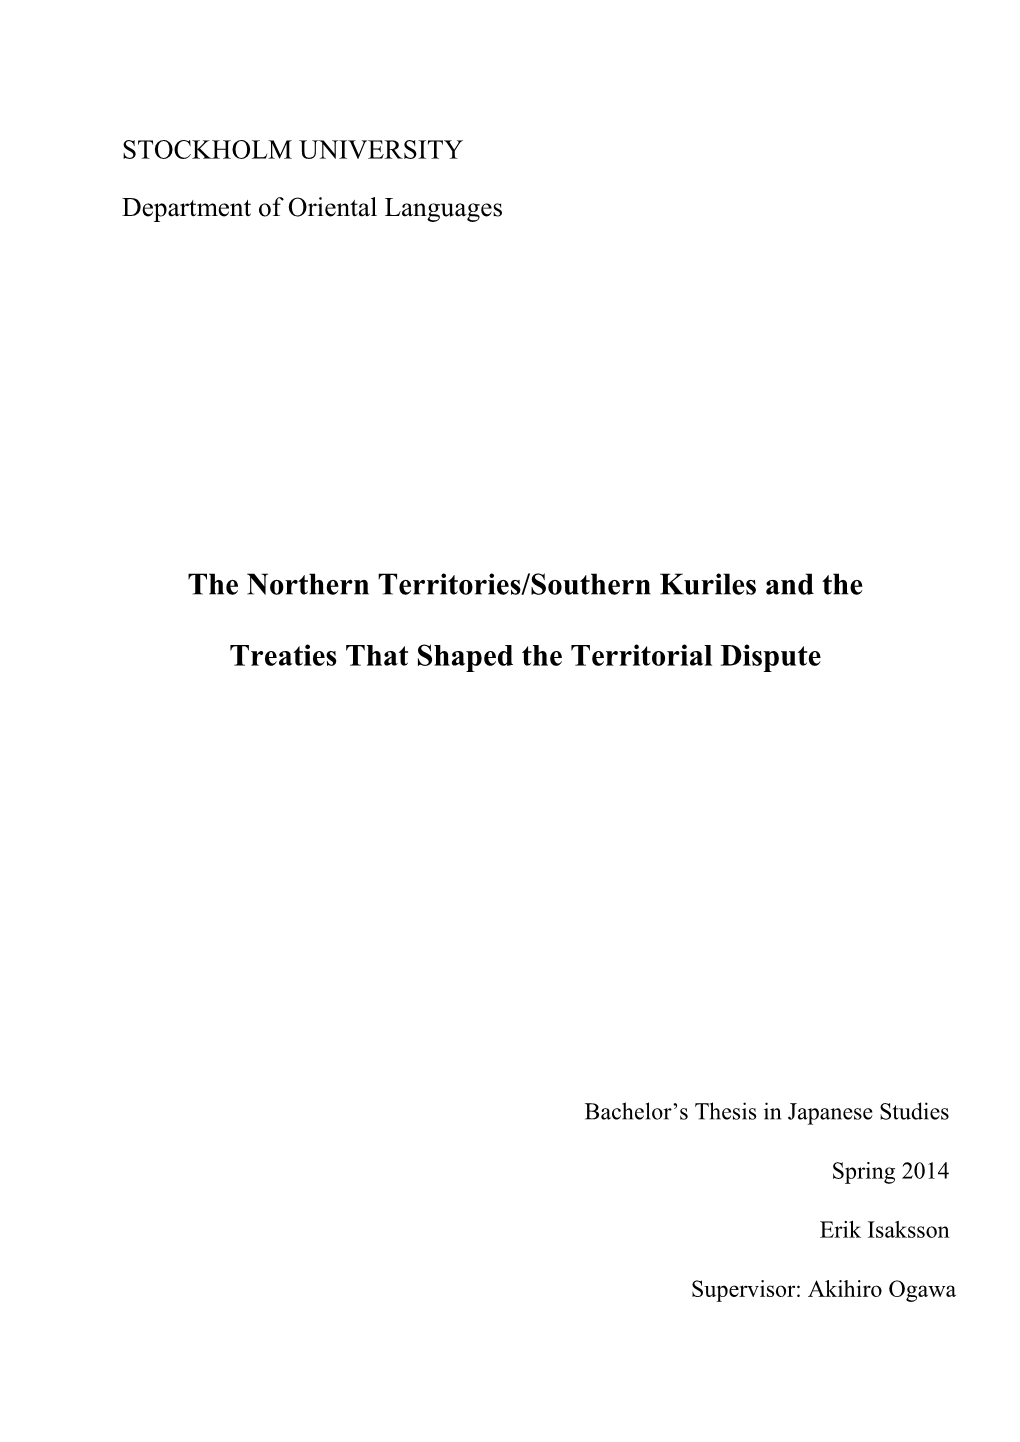 The Northern Territories/Southern Kuriles and the Treaties That